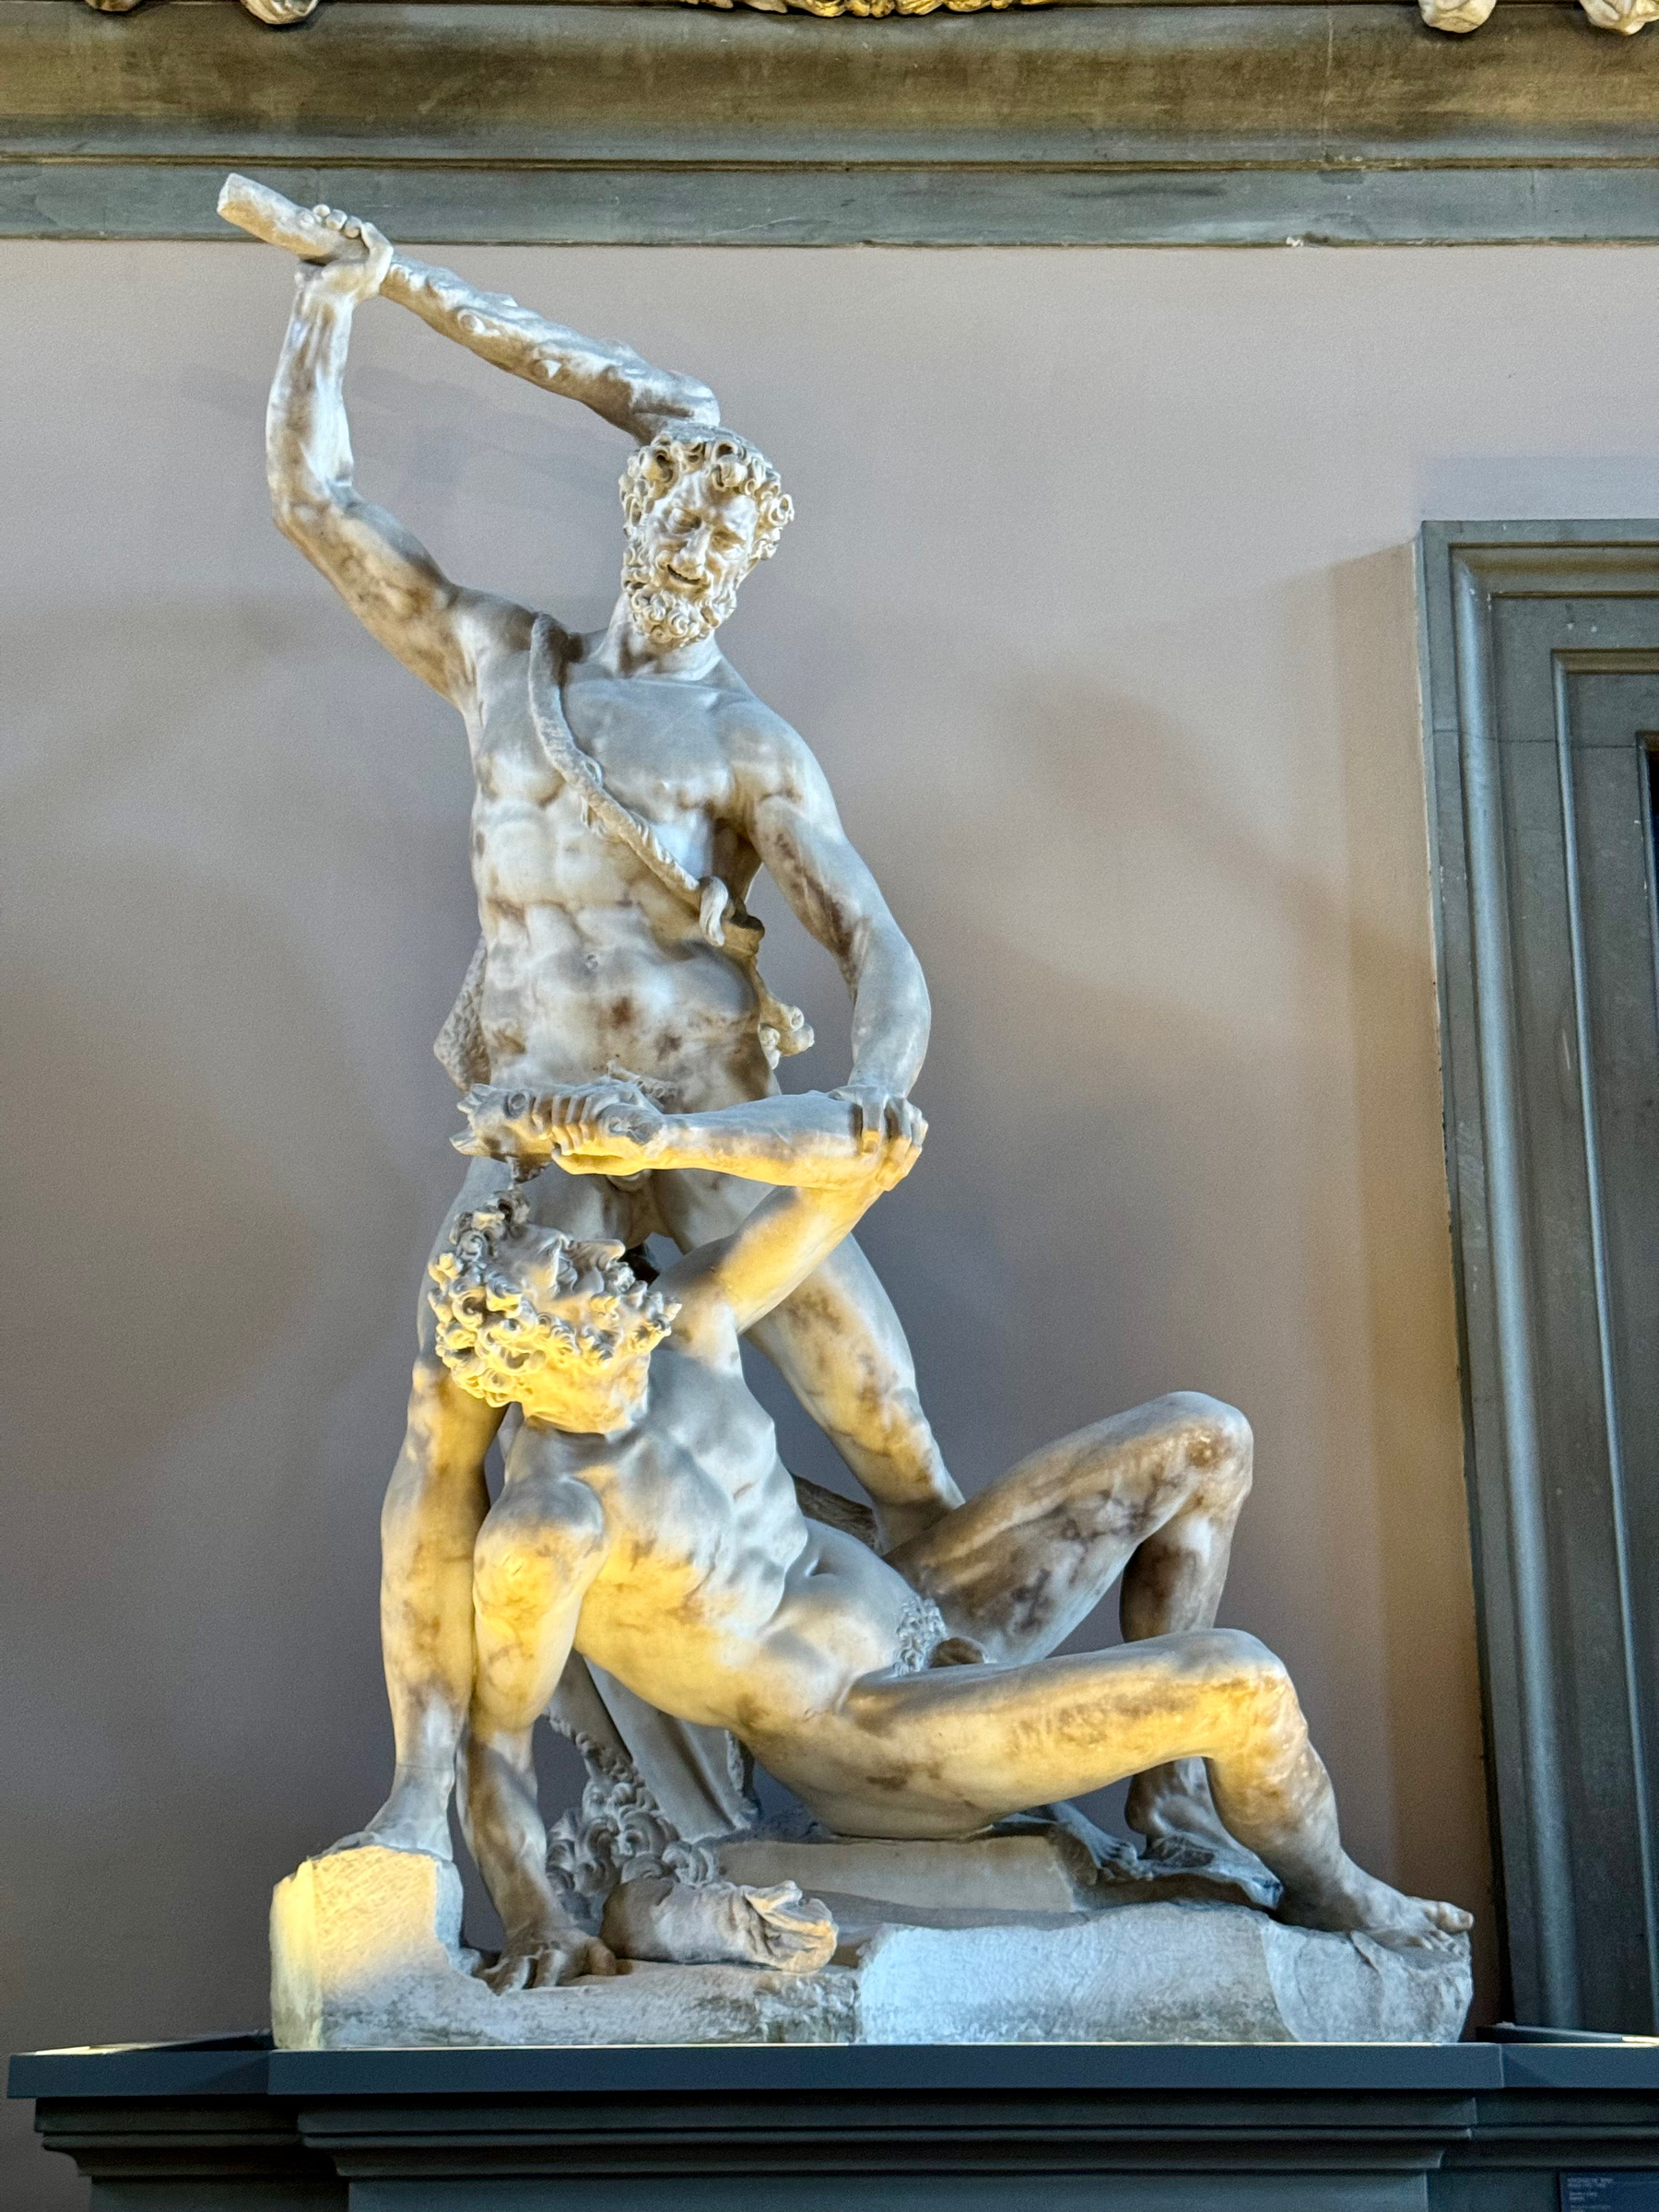 A marble sculpture depicting two male figures in a dynamic struggle. One figure stands over the other, holding a large wooden club raised above his head, while the other figure lies beneath, attempting to defend himself with an arm raised.